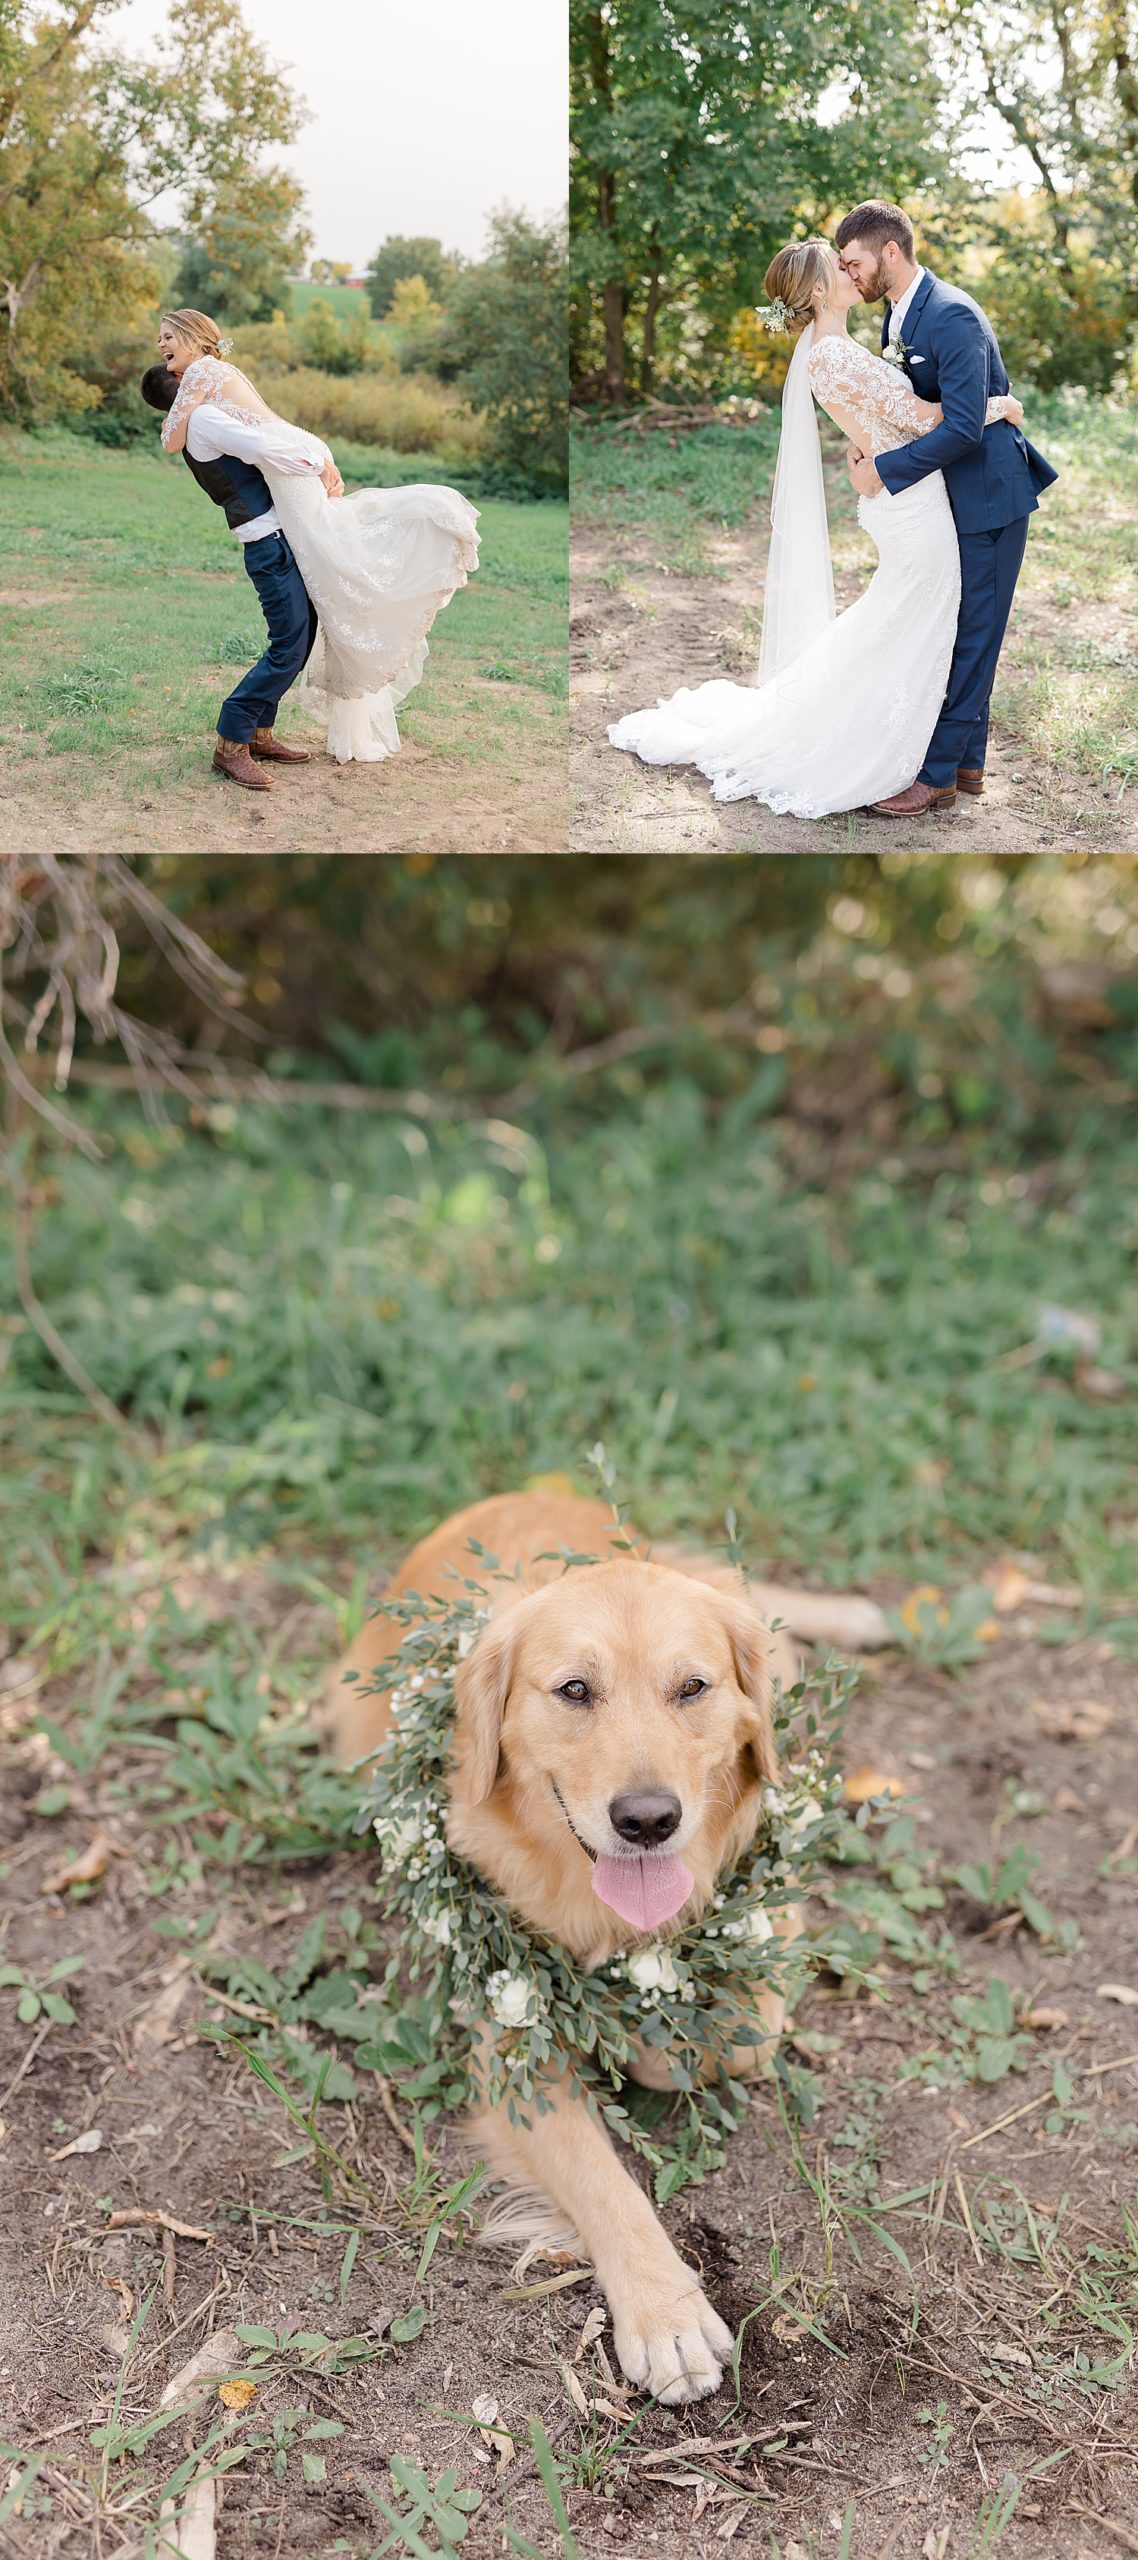 dog wearing floral collar at wedding venue on wedding day for bride and groom